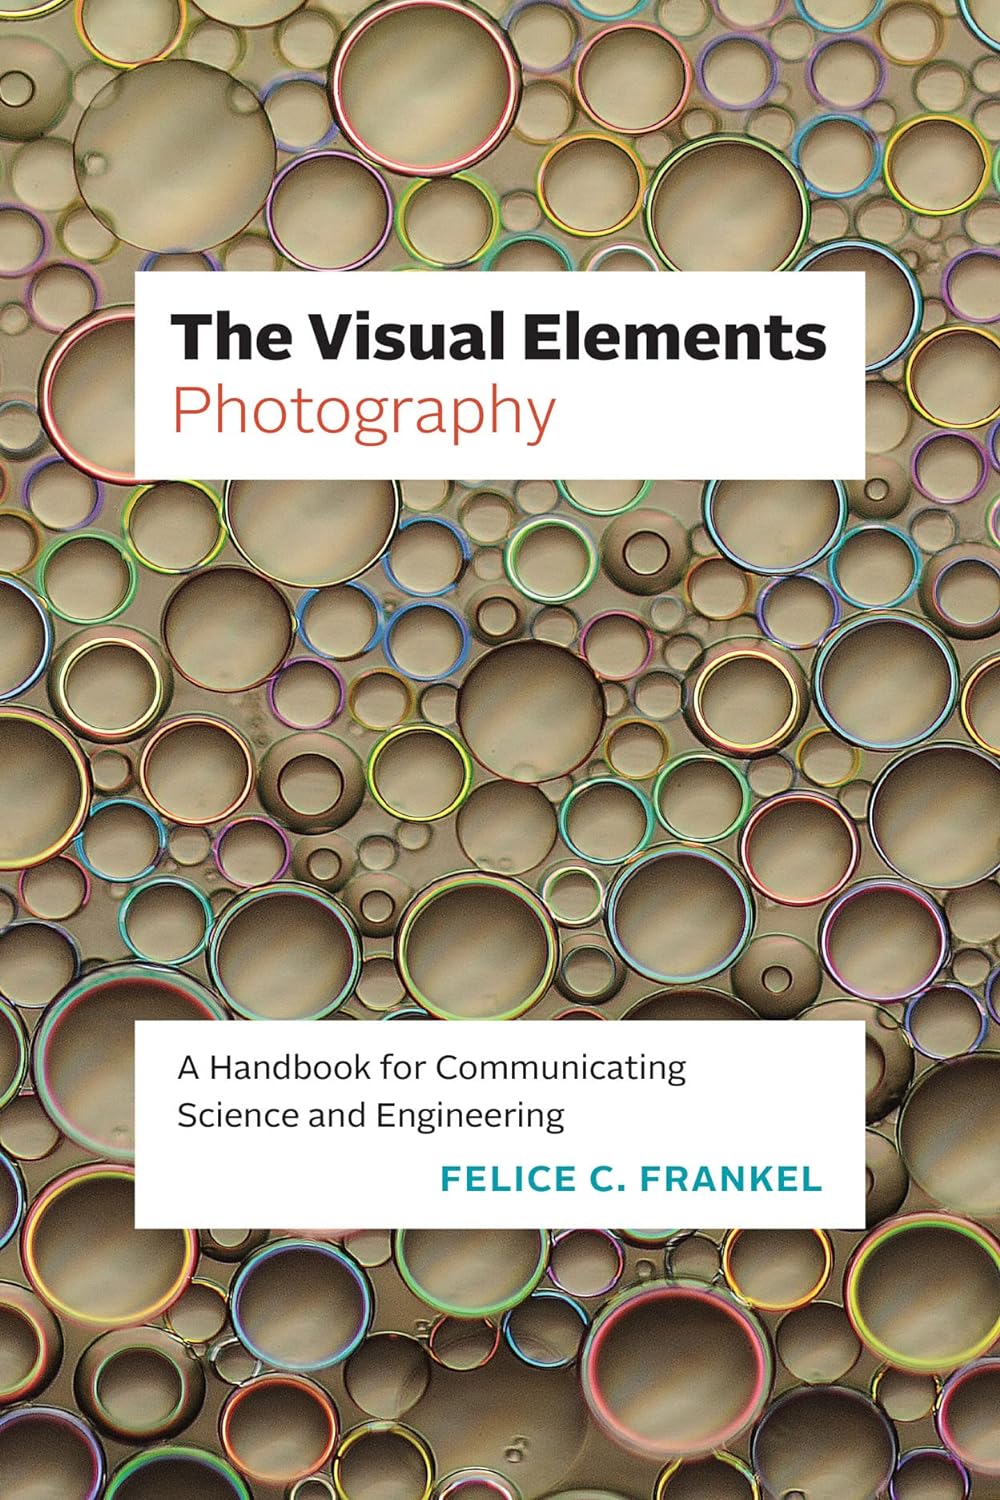 The cover of the book The Visual Elements-Photography. The background is a tan color, which rings of varying sizes and colors laid on top. 